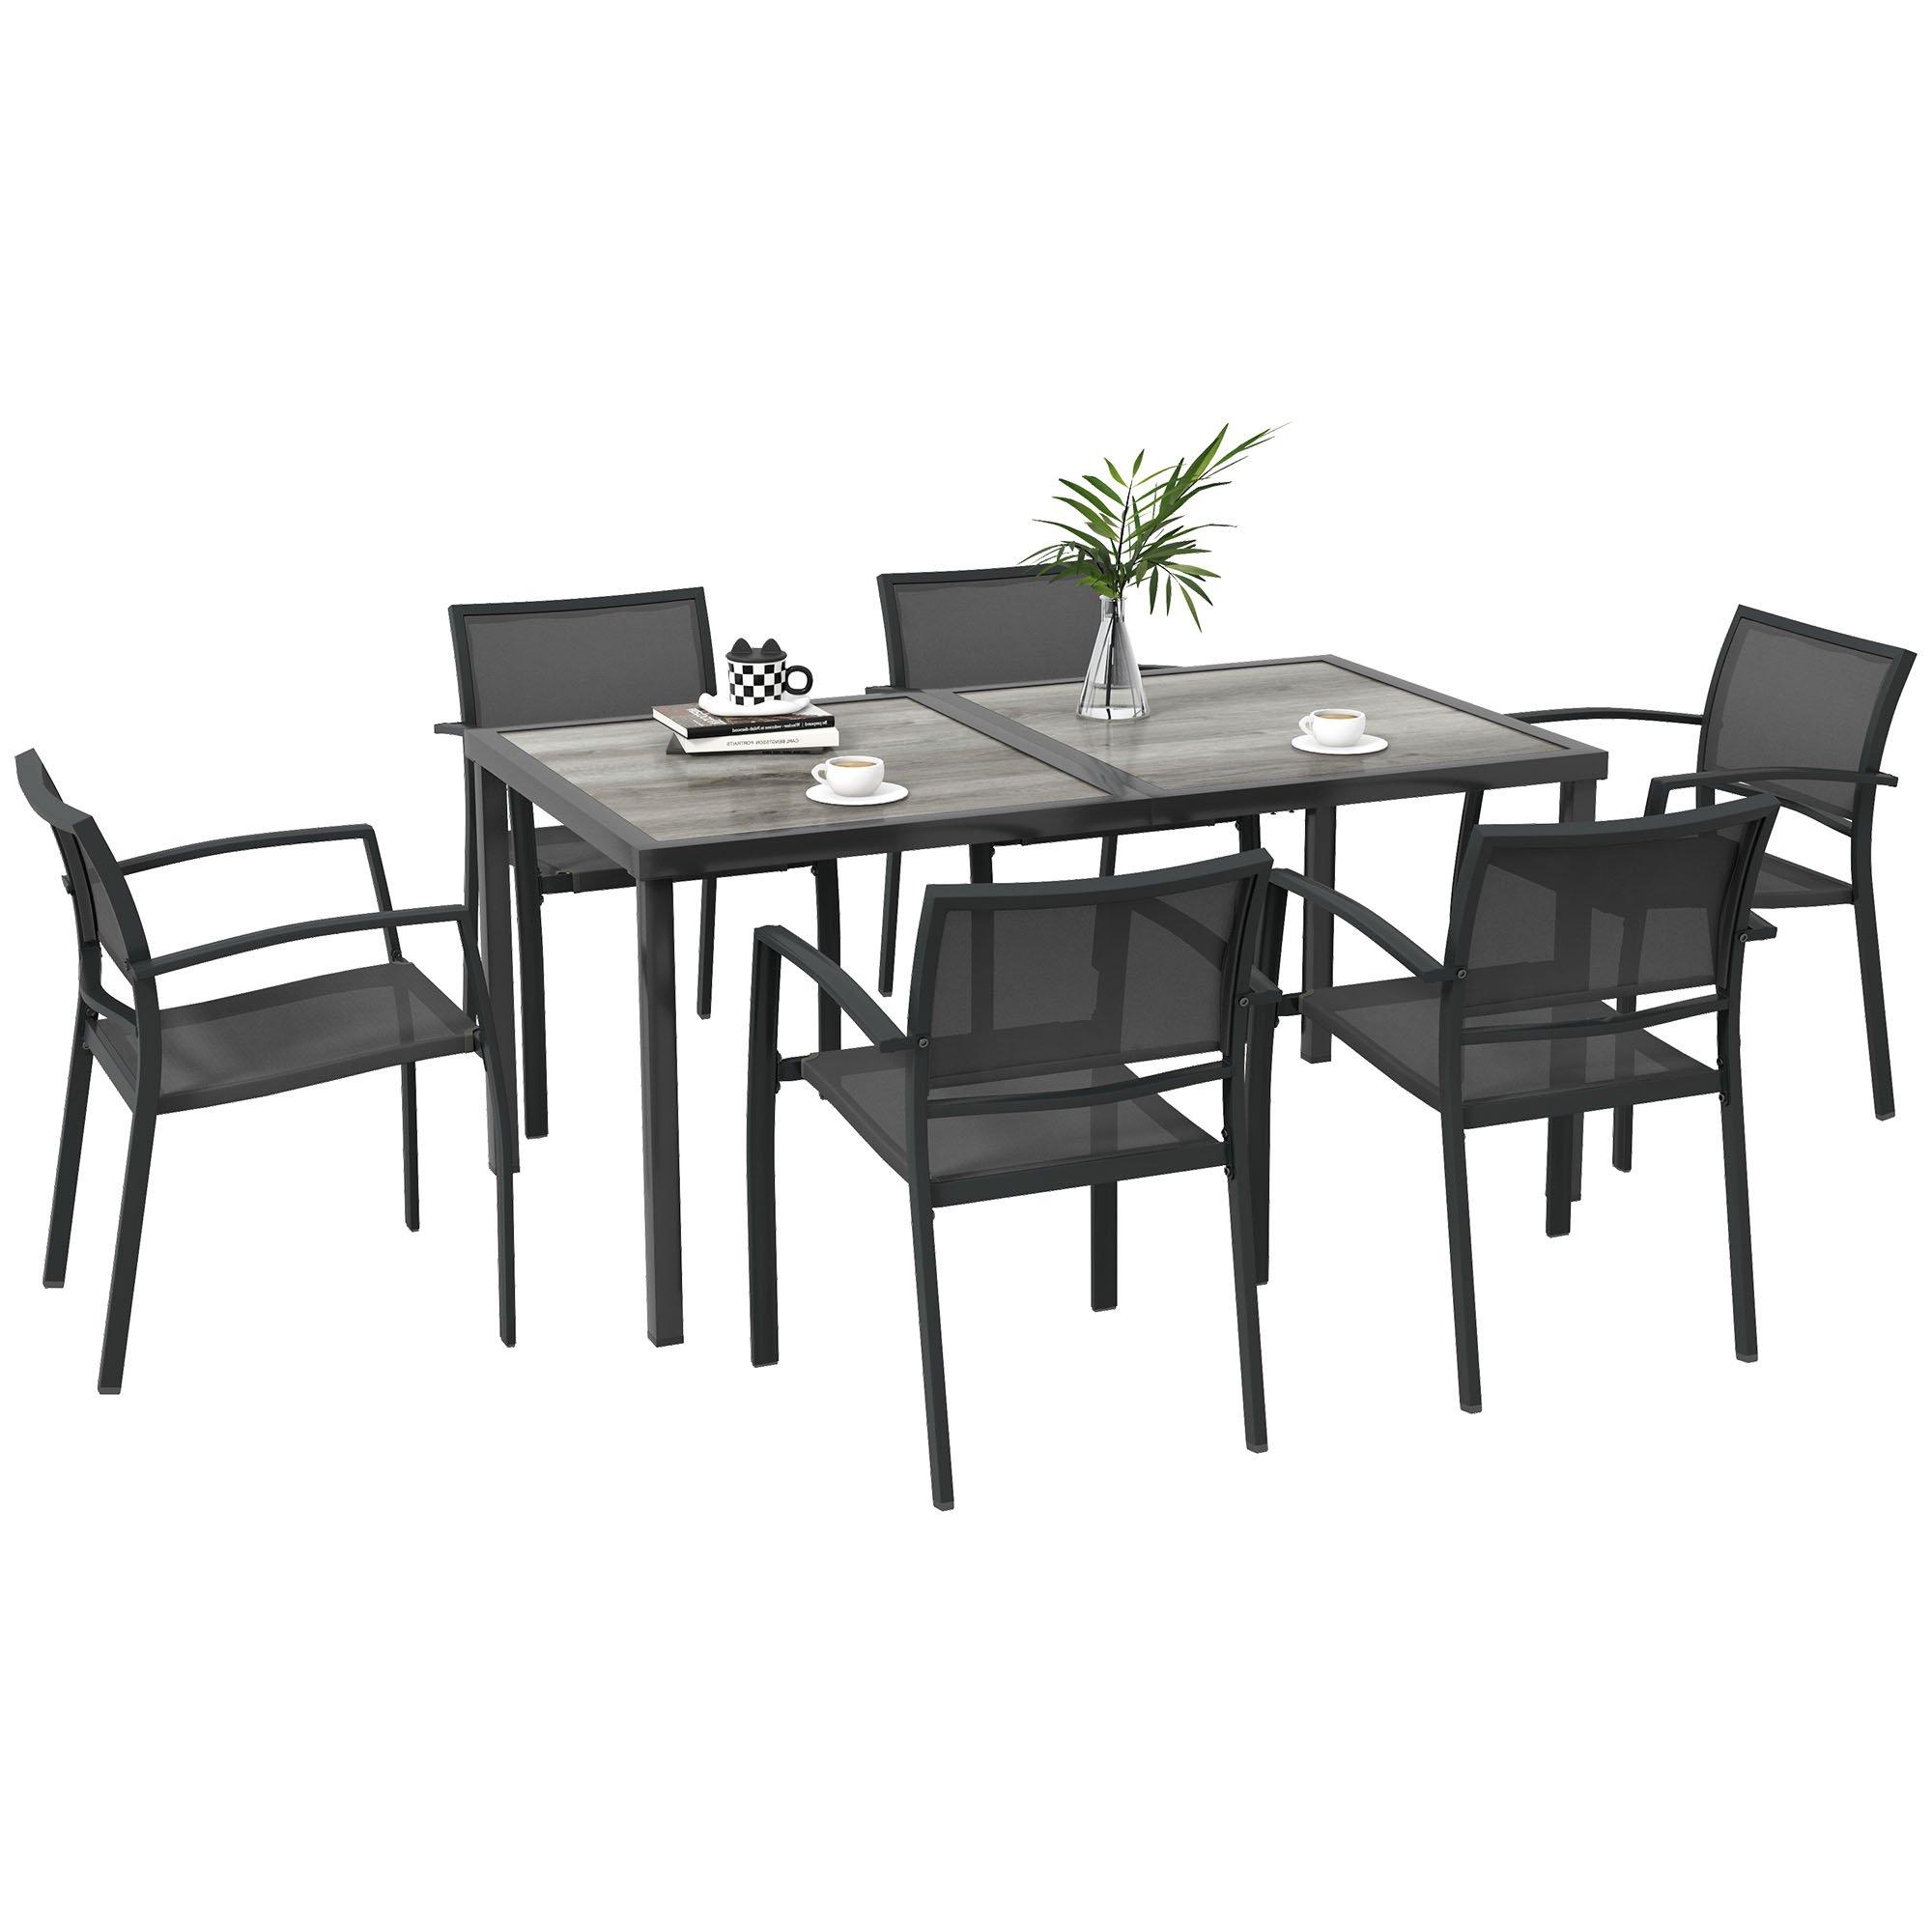 7 Pieces Patio Dining Set with 6 Stackable Chairs for Poolside